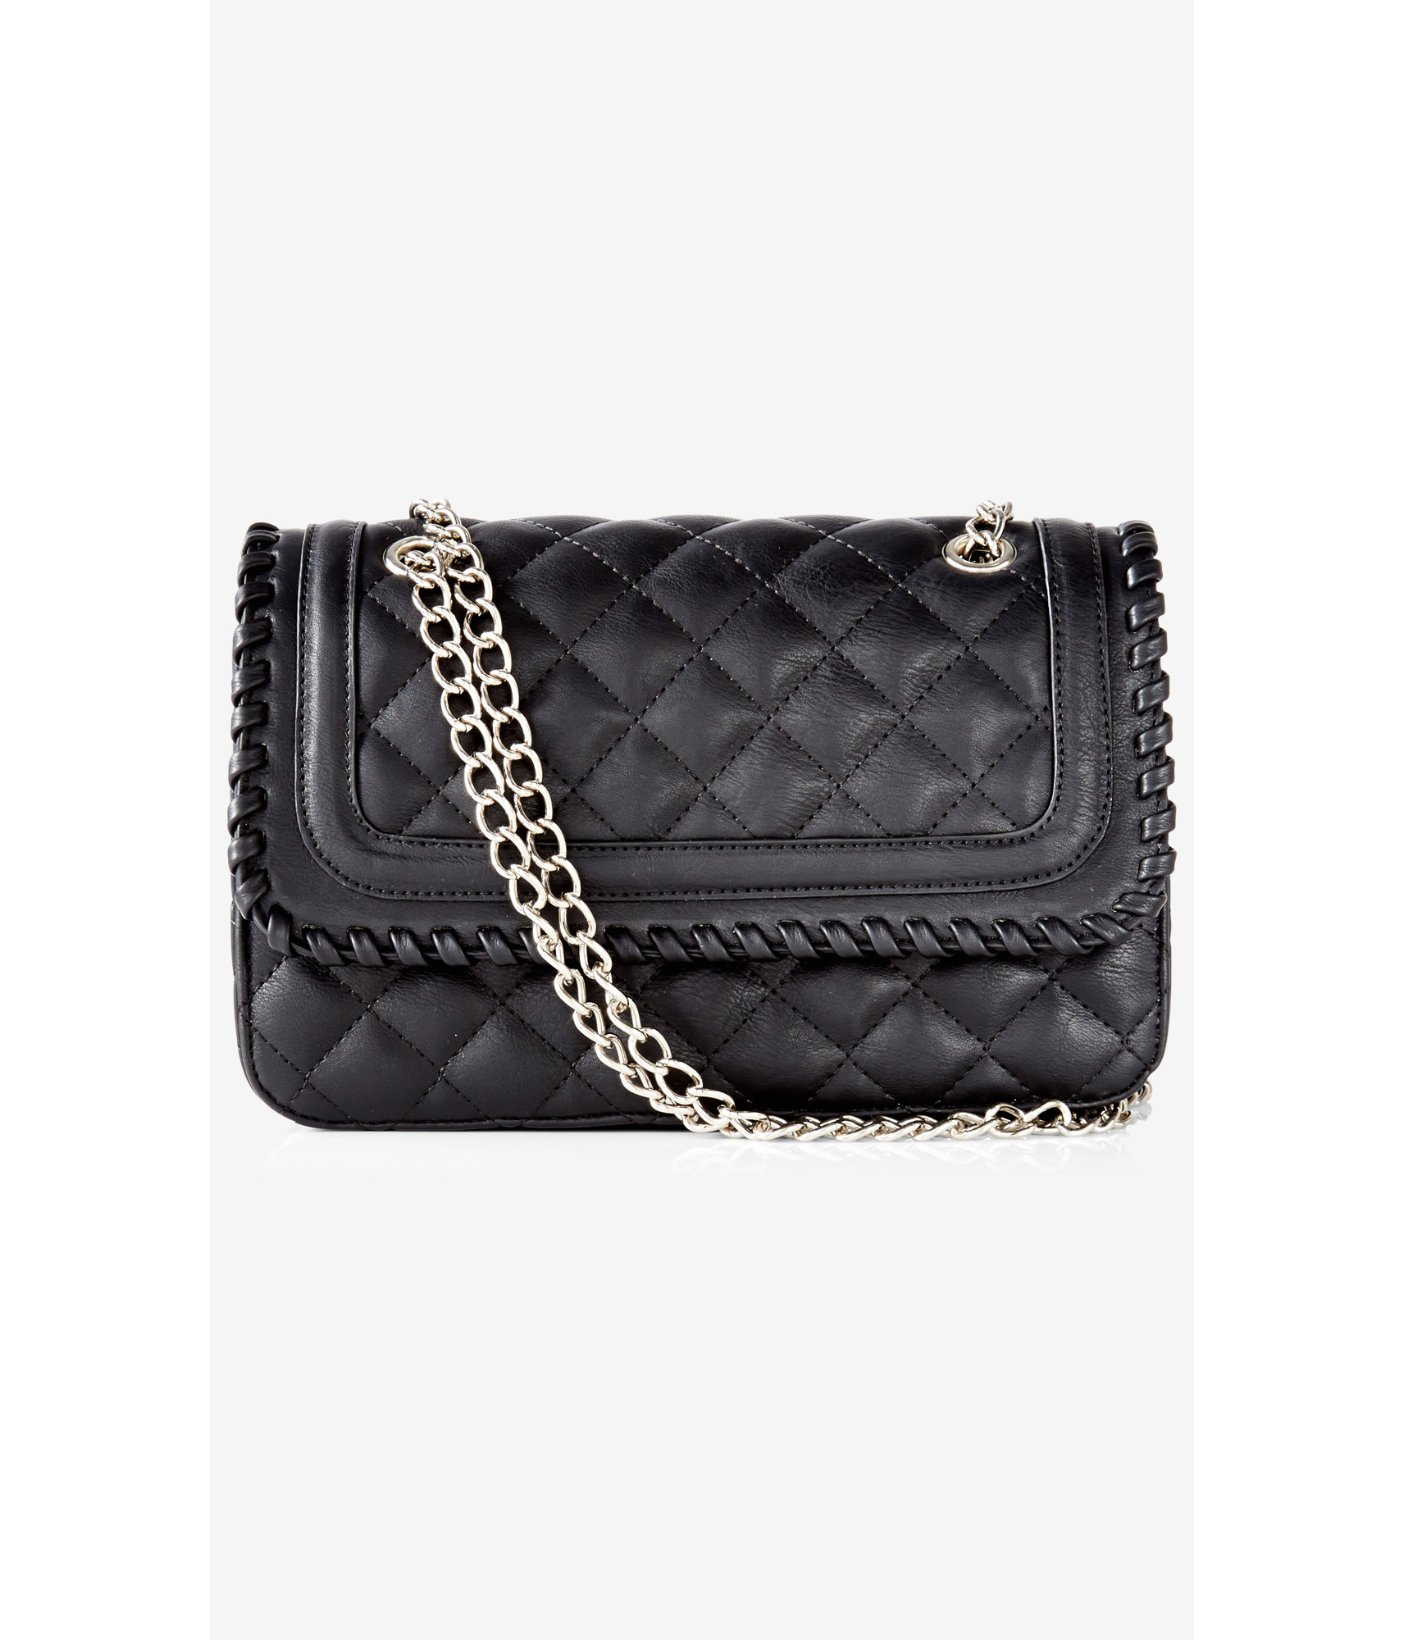 Express Whipstitch Quilted Chain Strap Shoulder Bag in Black | Lyst